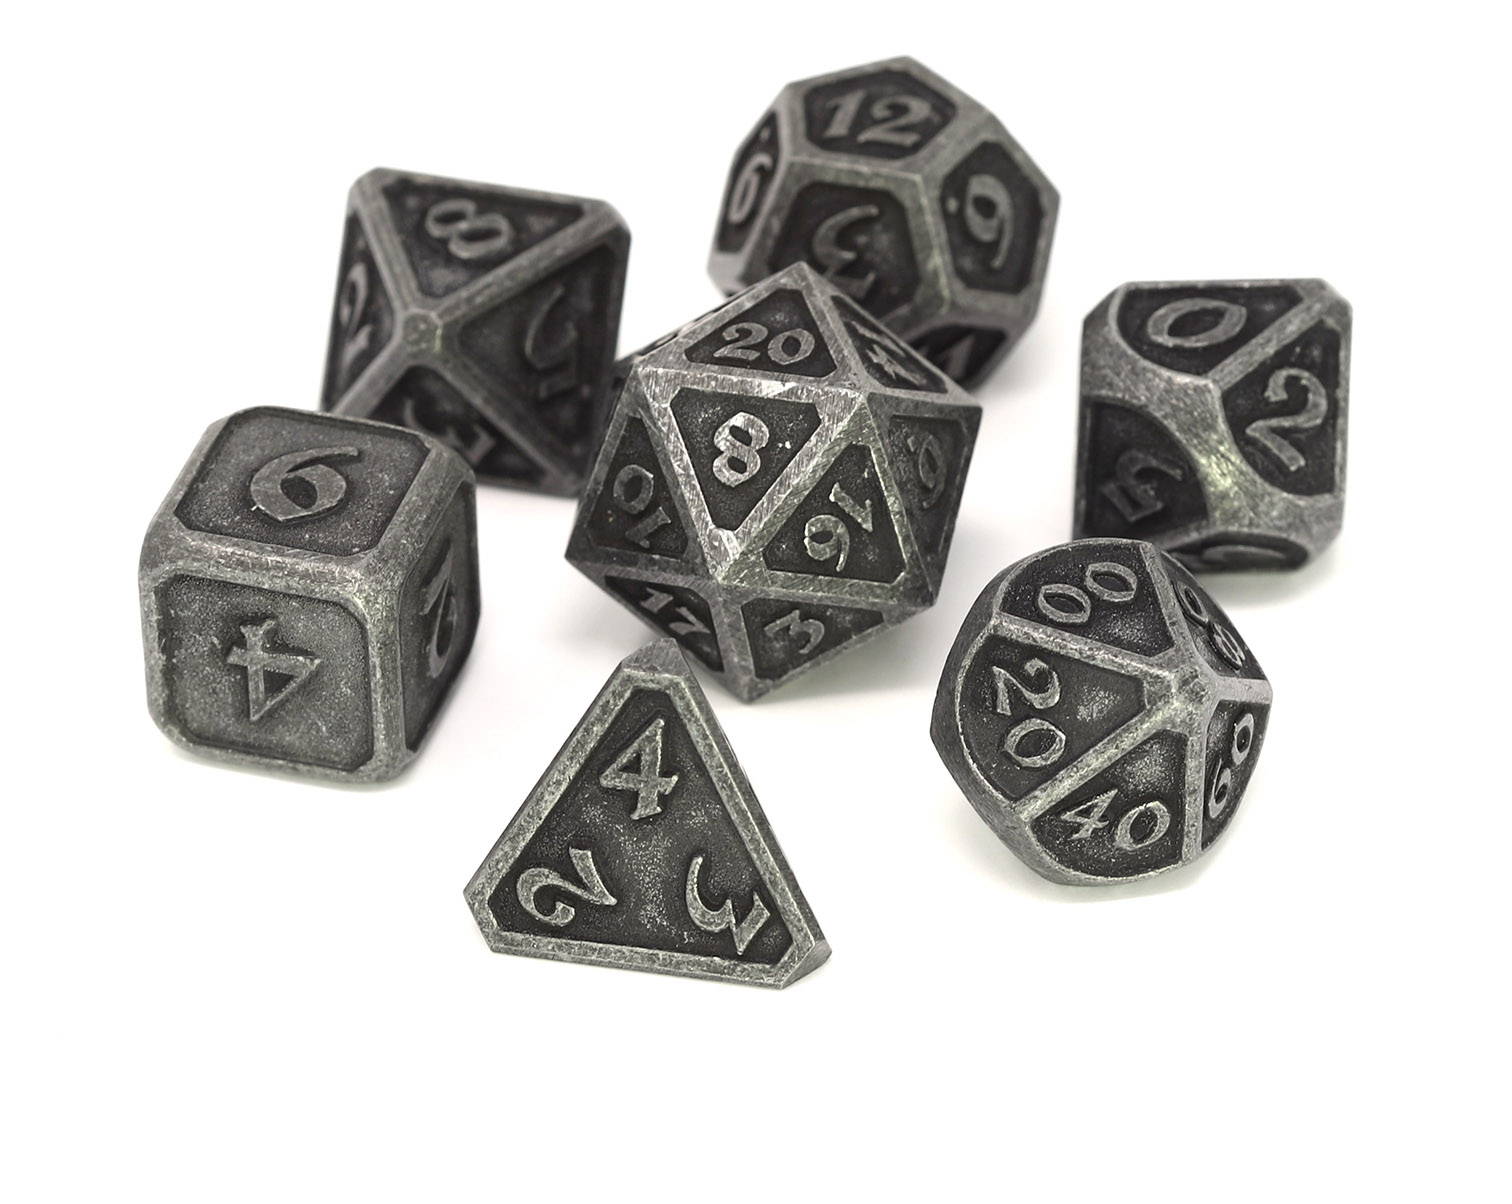 Dice Handmade Dice Dungeon And dragons Dice RPG Dice Polyhedral Dice ...